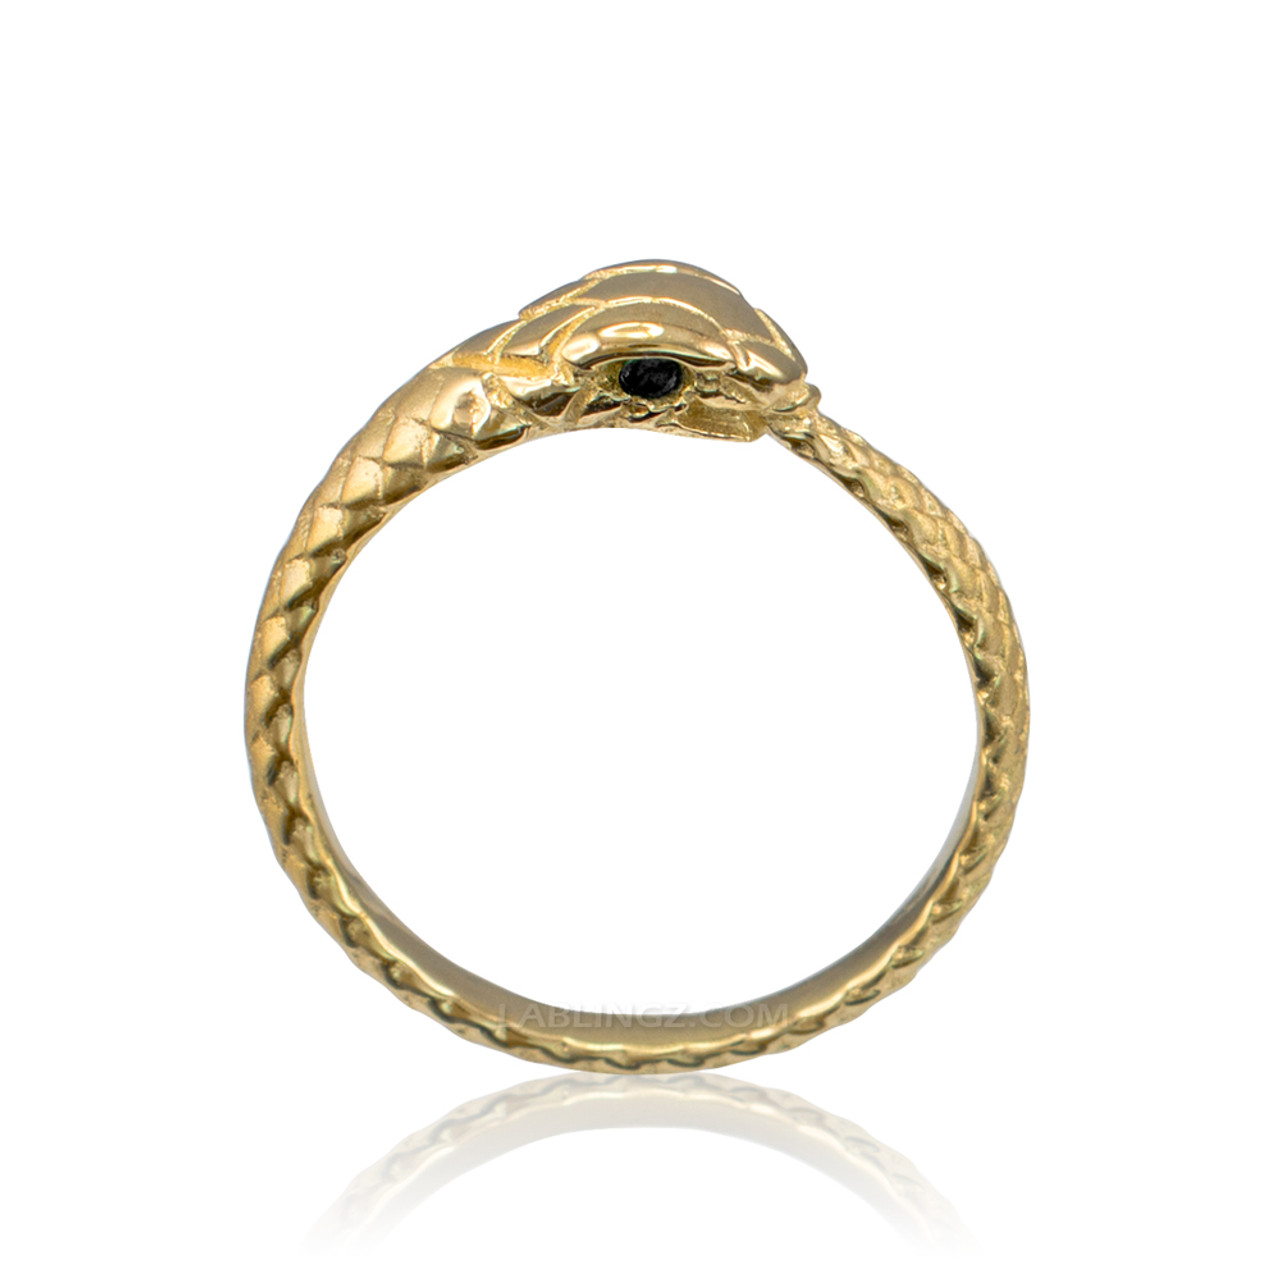 Solid Yellow Gold Tail Biting Black Diamond Ouroboros Ring Band.